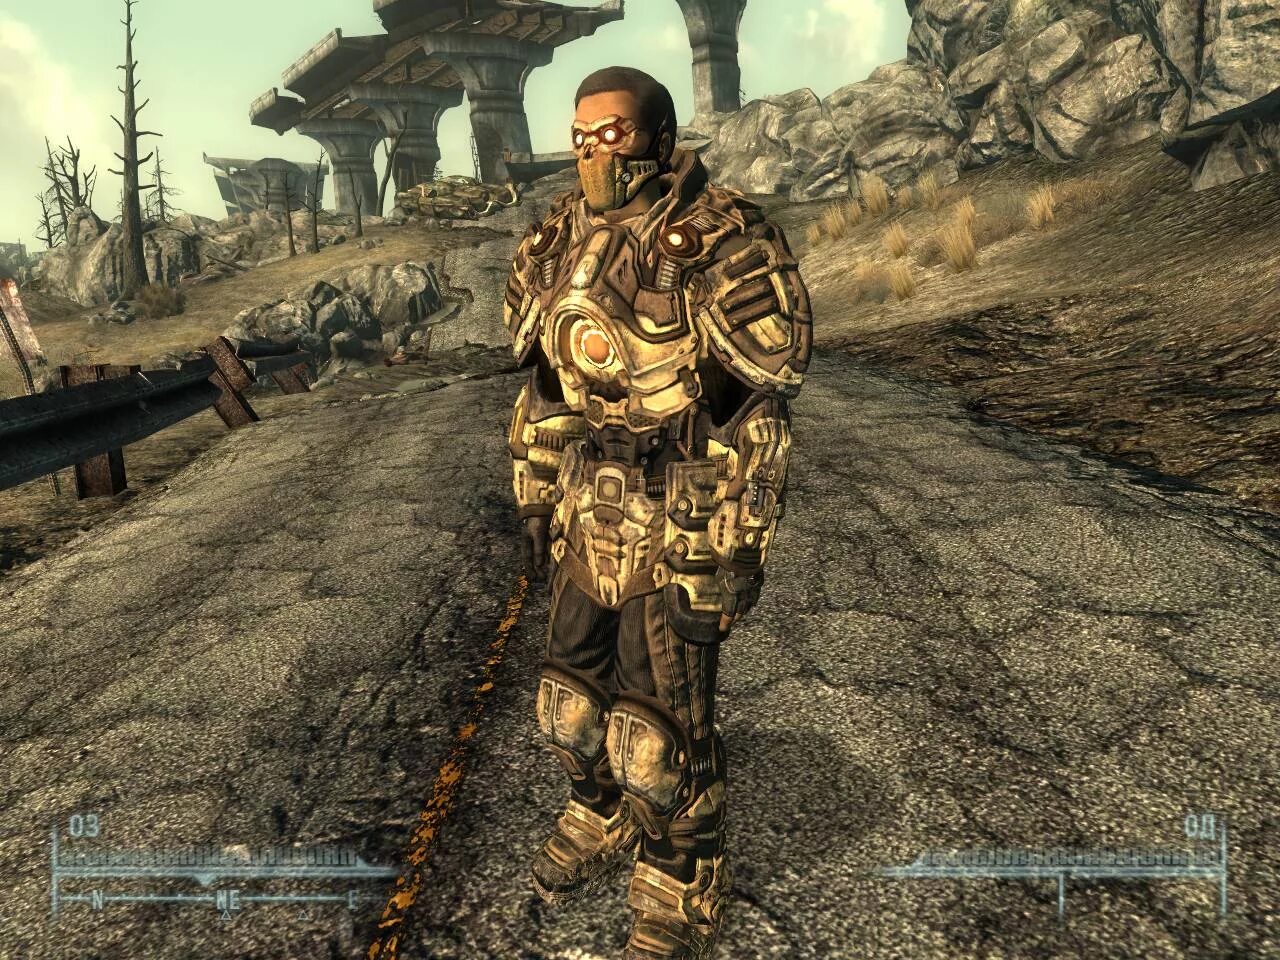 Fallout броня читы. Фоллаут 3 броня. Броня фоллаут фоллаут 3. Fallout 3 Armor Mod. Фоллаут 3 броня и фоллаут 3.